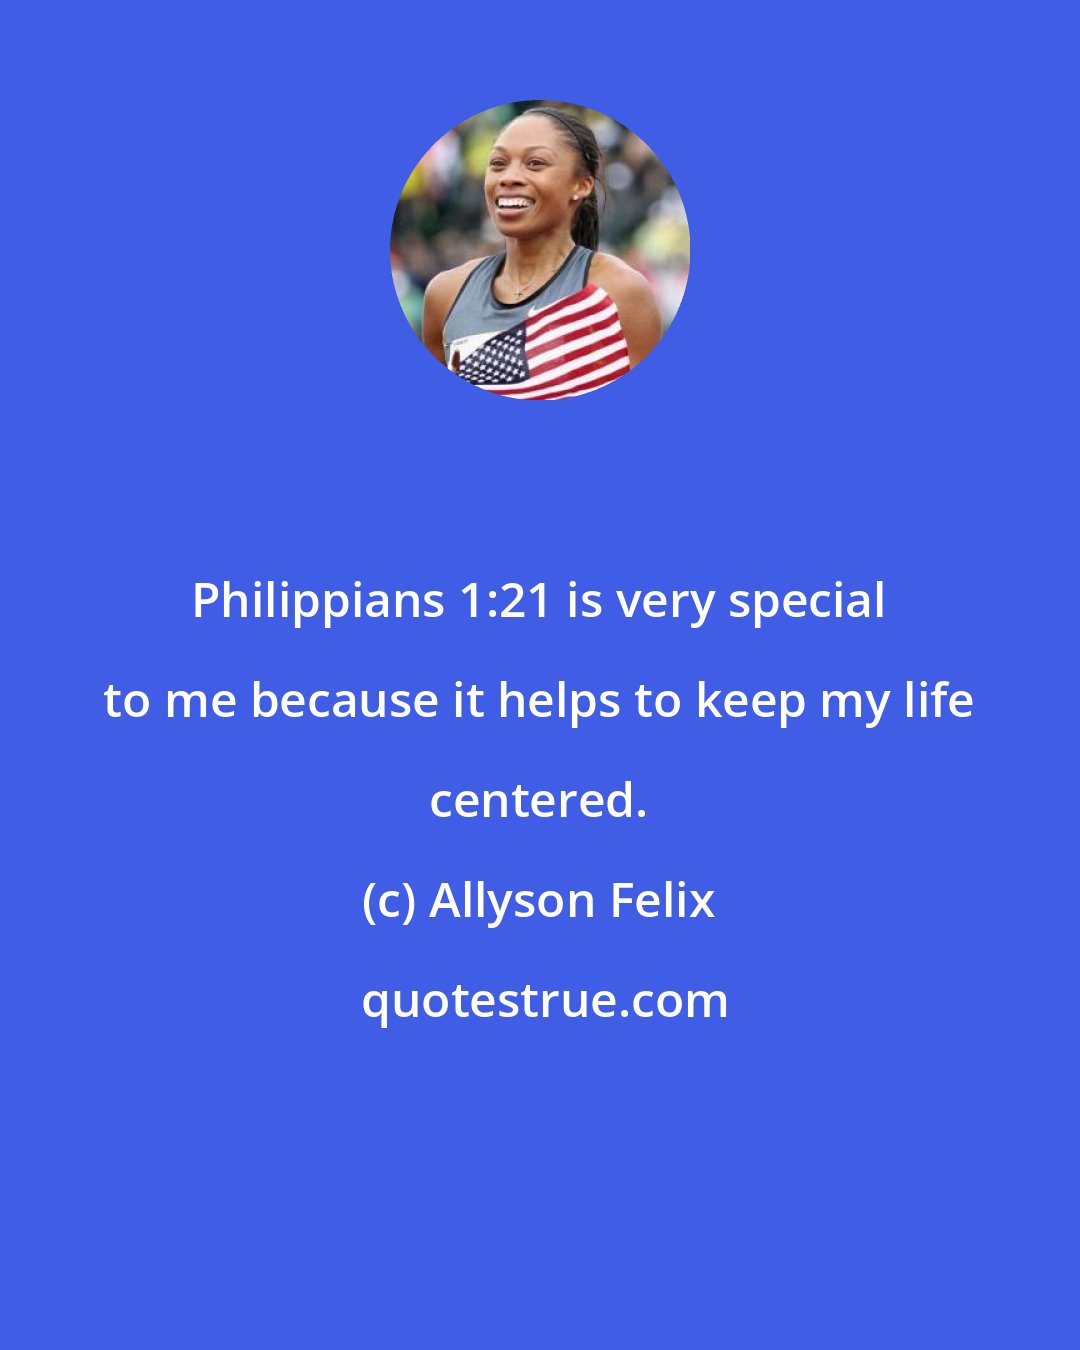 Allyson Felix: Philippians 1:21 is very special to me because it helps to keep my life centered.